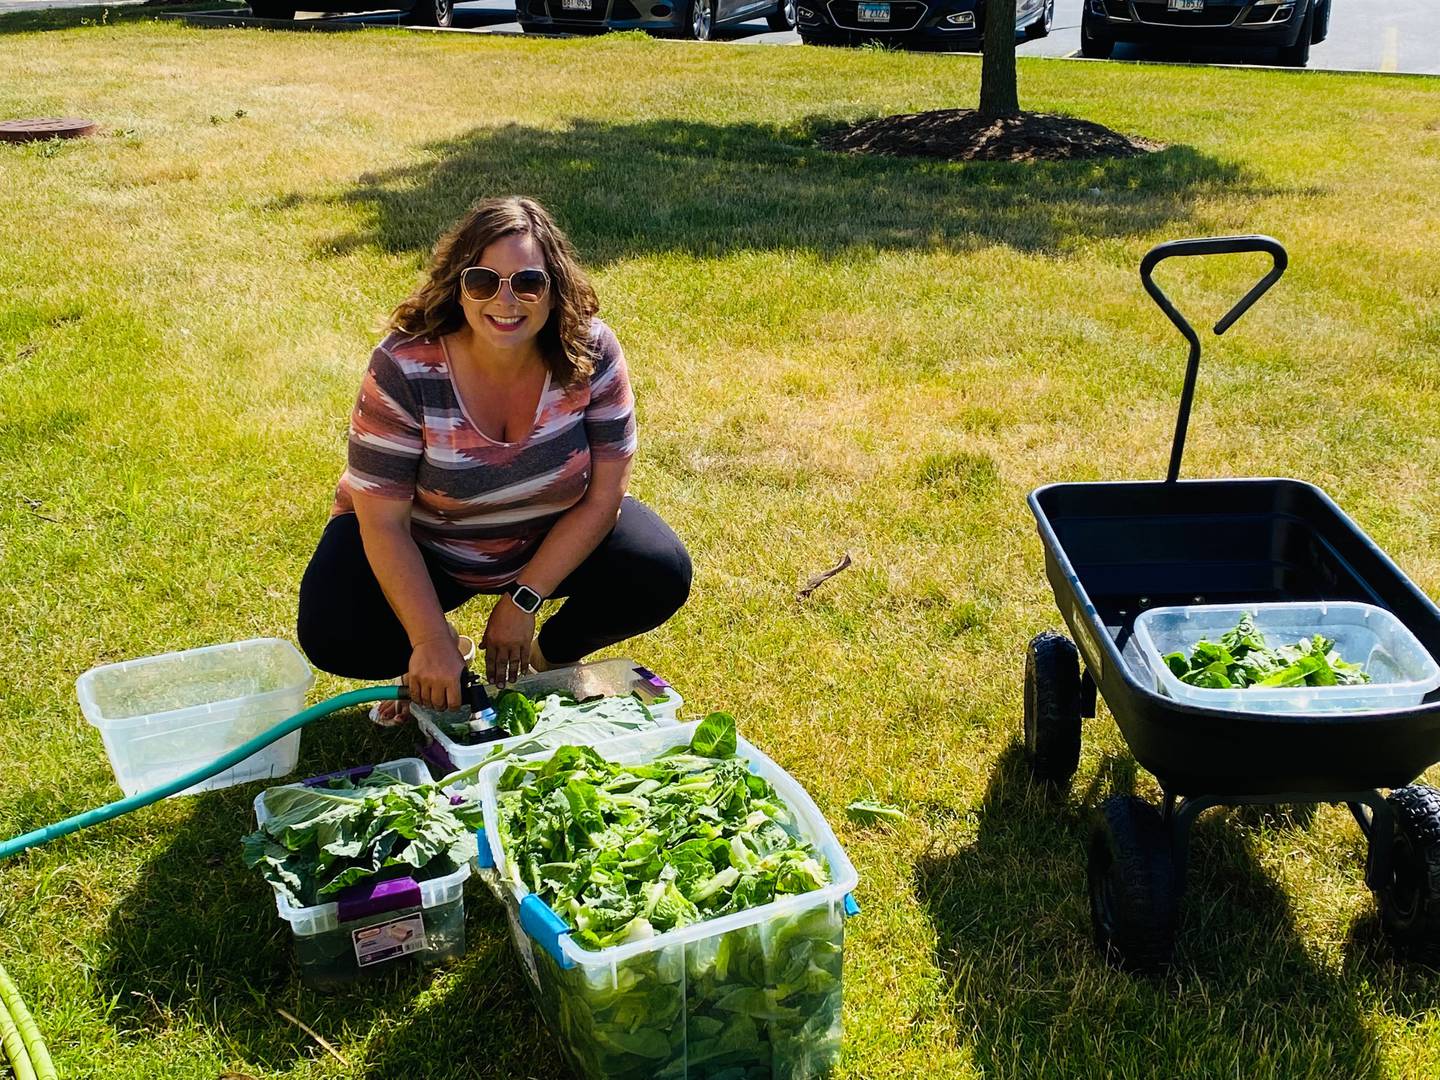 This was the fourth year for the garden at OSF St. Paul in Mendota, which produced the largest return in produce yet. The produce is offered to employees and for patient meals and donated to the Mendota Area Christian Food Pantry. Marisa Kibble is senior financial analyst and community gardens volunteer for OSF St. Paul.